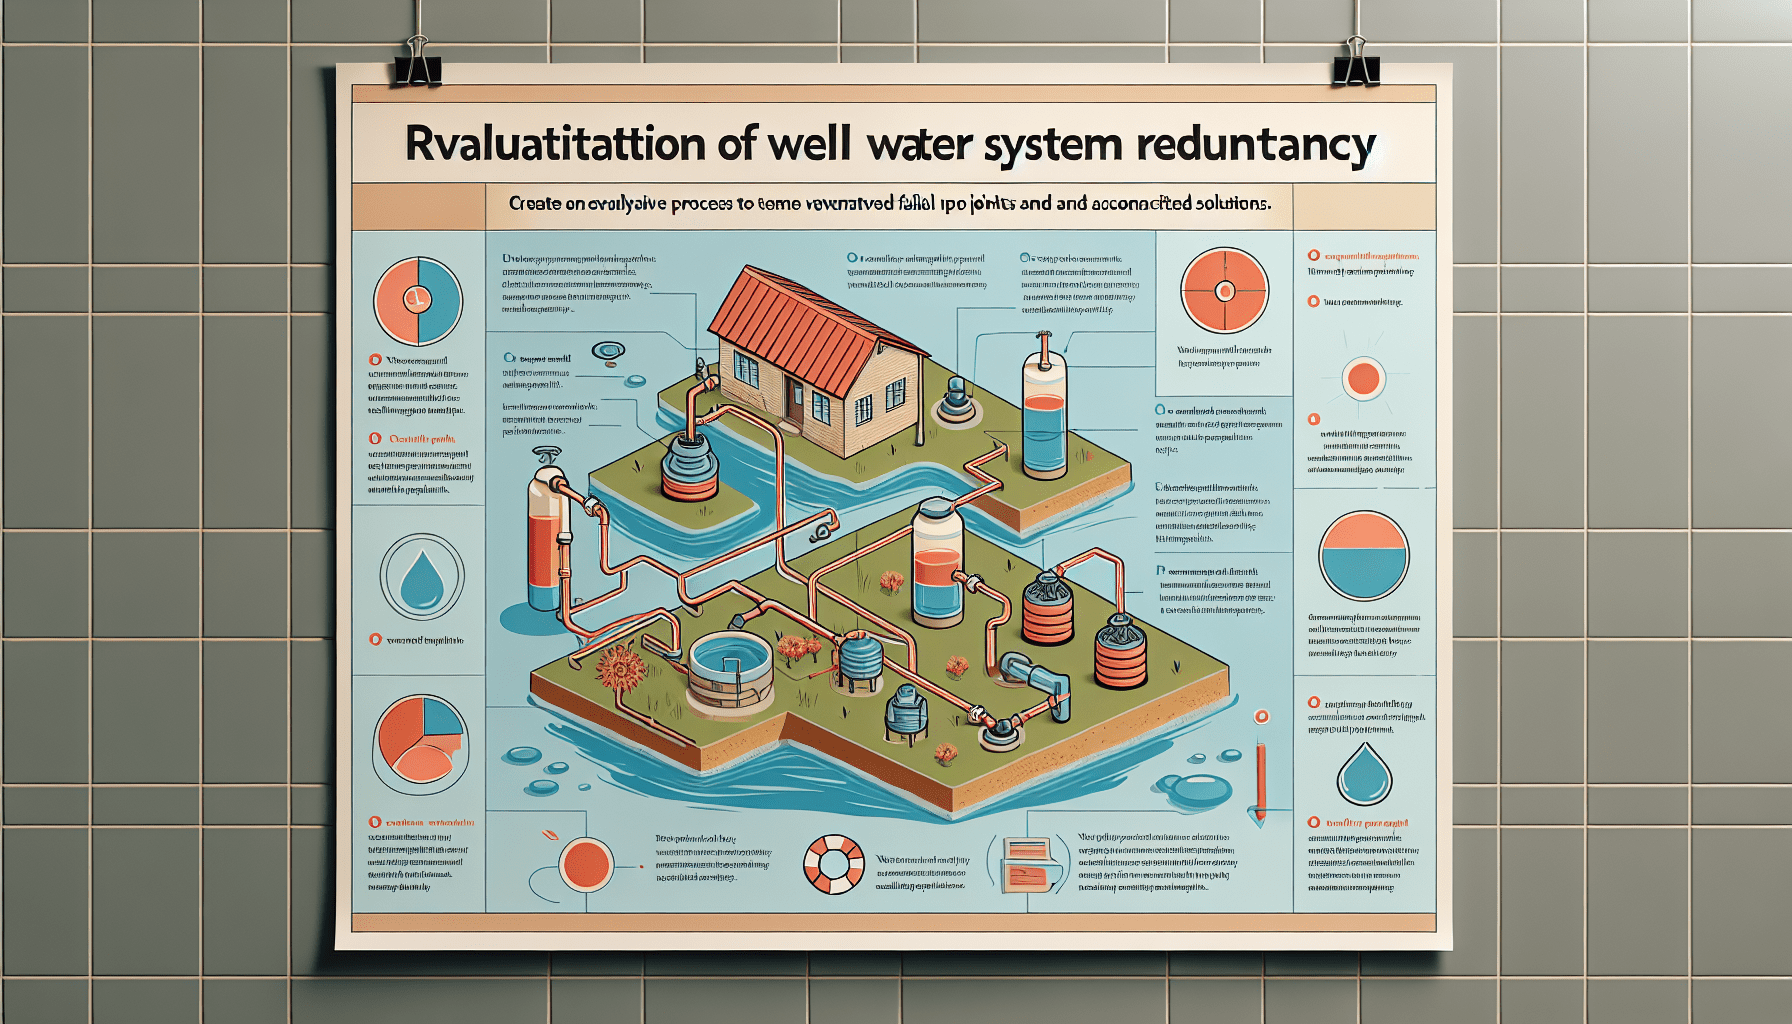 Are There Resources For Well Owners Looking To Assess Well Water System Redundancy?